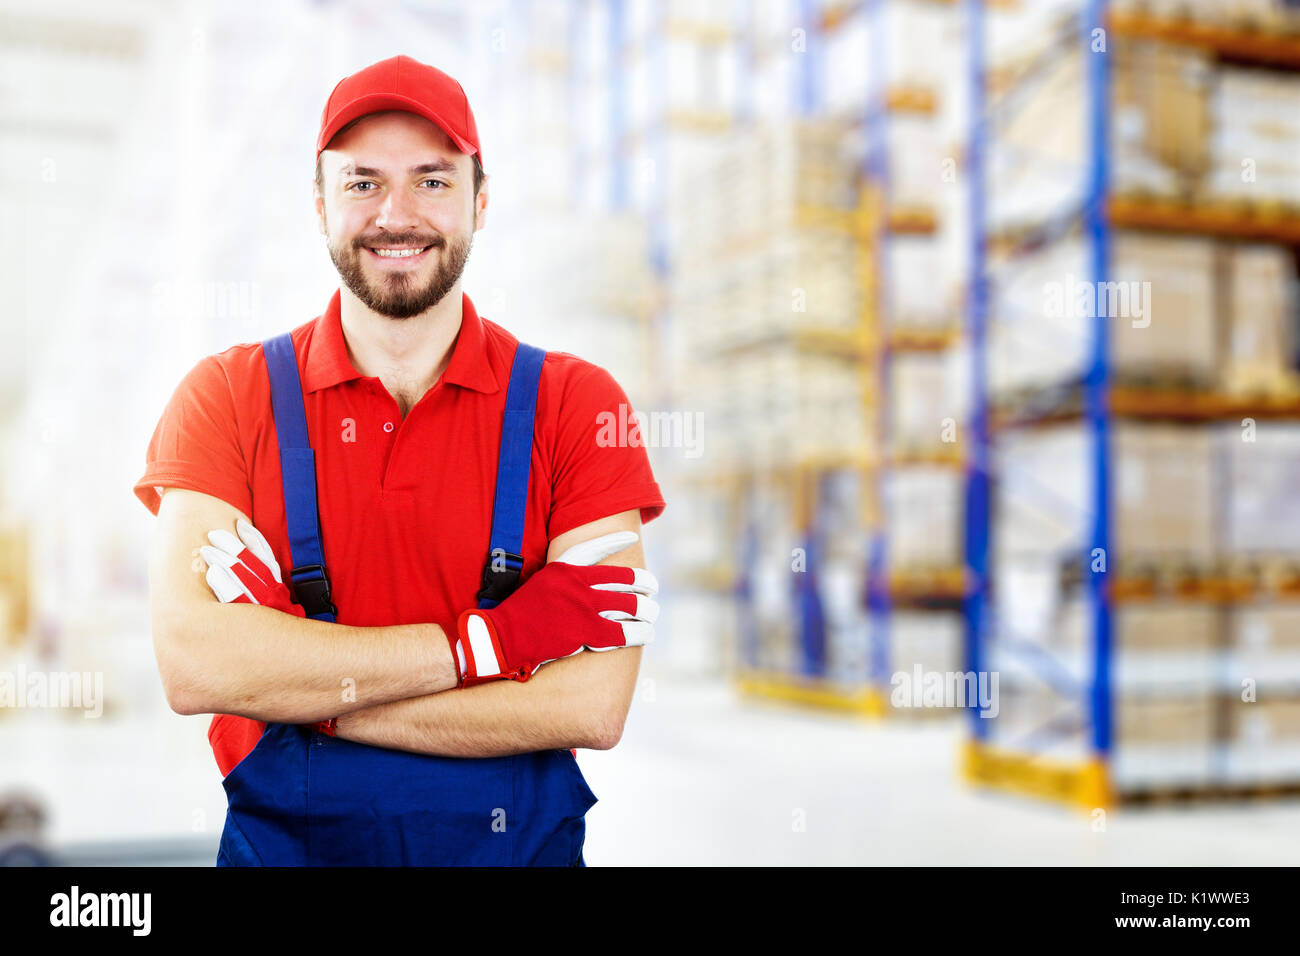 smiling young warehouse worker in red uniform. copy space Stock Photo